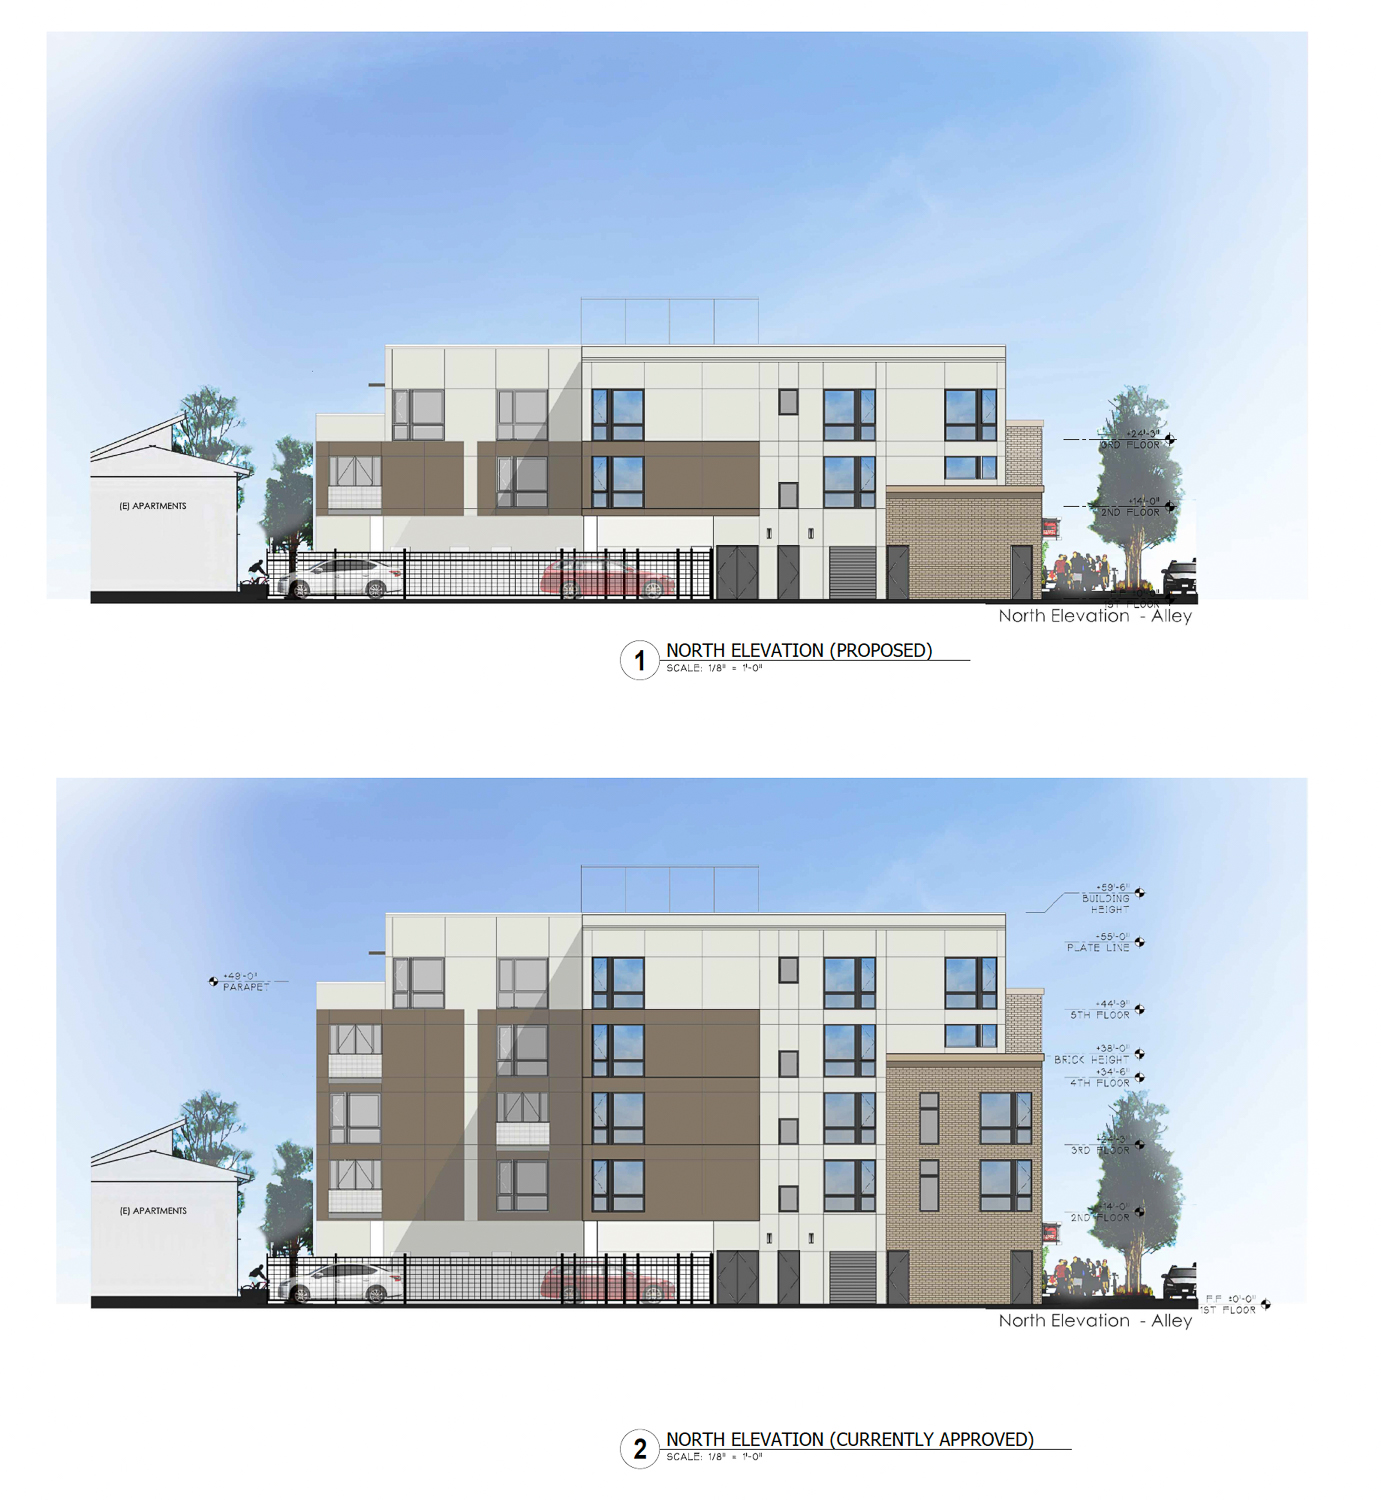 2131 16th Street updated (top) and previously approved (bottom) elevations, illustration by LCA Architects